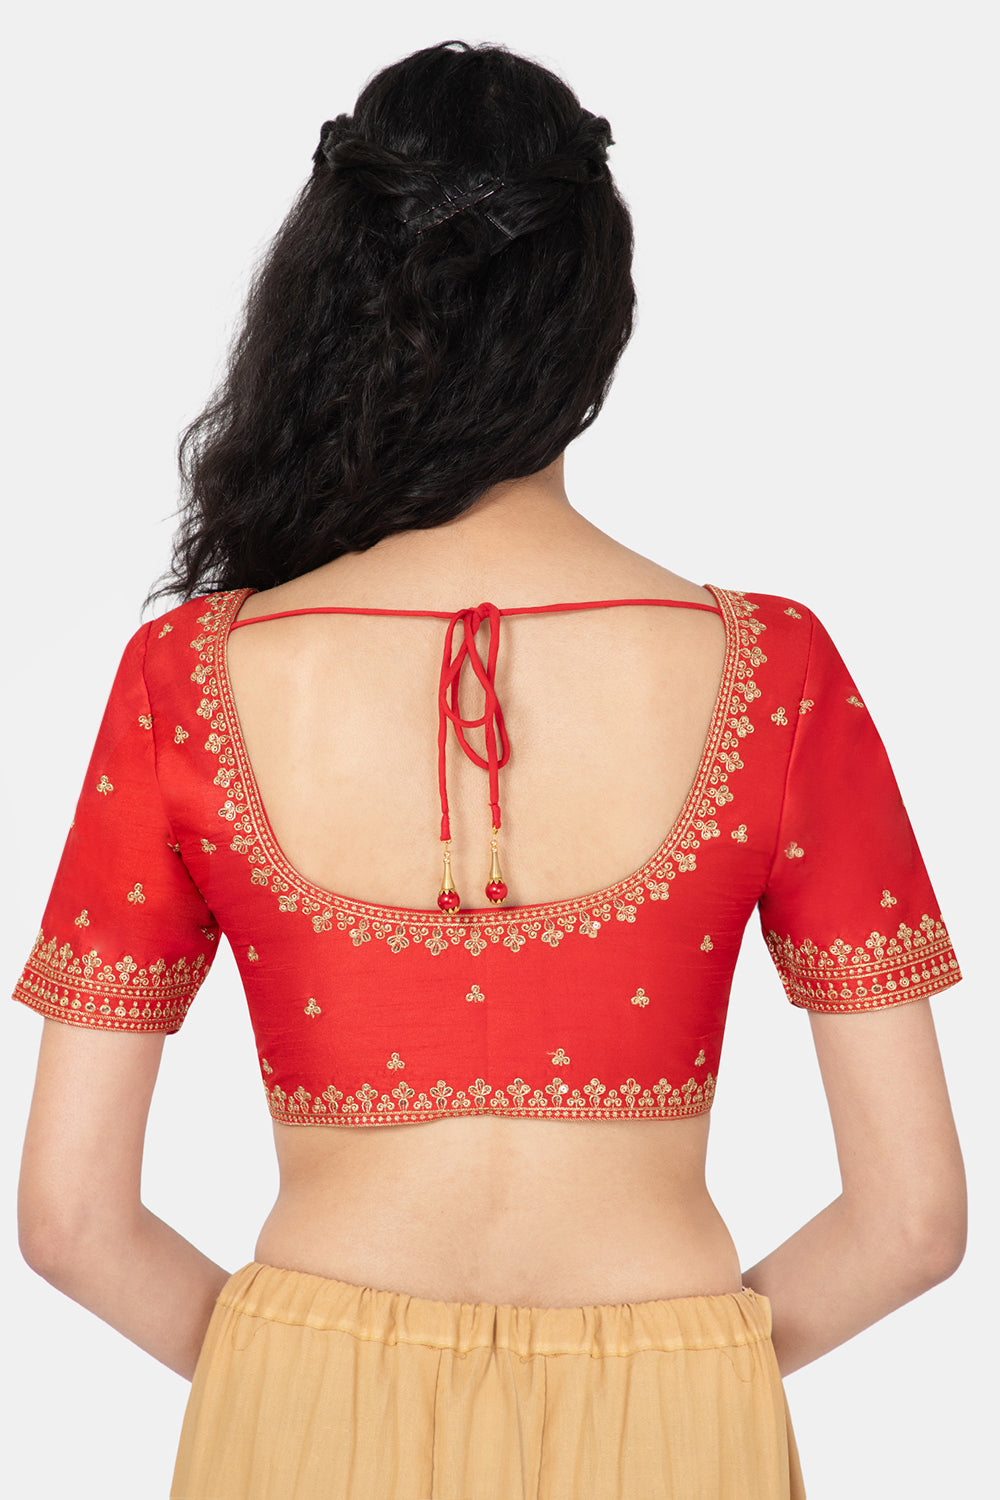 Naidu Hall Ethnic Saree Blouse with U-Neck Elbow Sleeves - Red